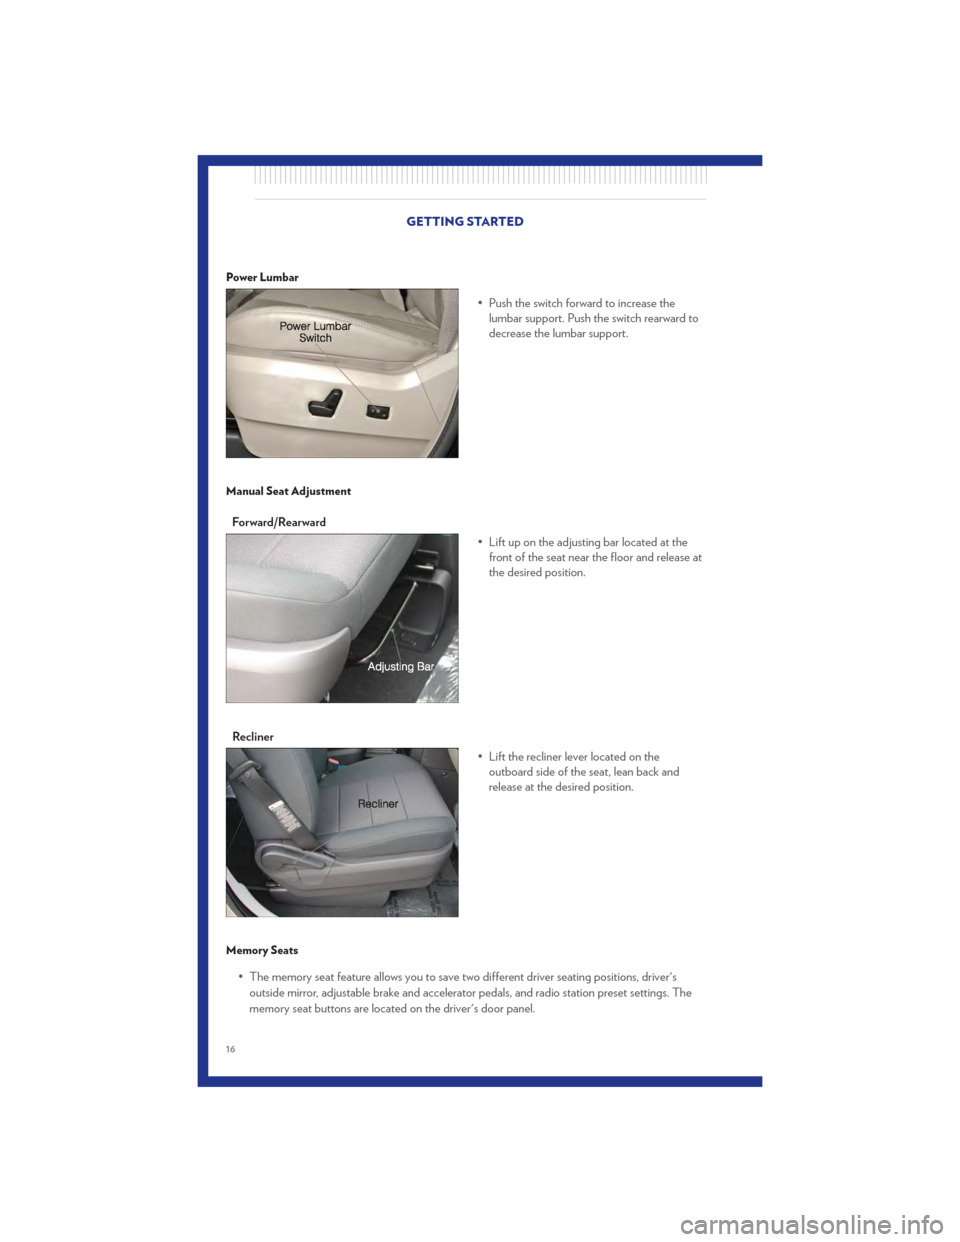 CHRYSLER TOWN AND COUNTRY 2011 5.G User Guide Power Lumbar
• Push the switch forward to increase thelumbar support. Push the switch rearward to
decrease the lumbar support.
Manual Seat Adjustment
Forward/Rearward
• Lift up on the adjusting ba